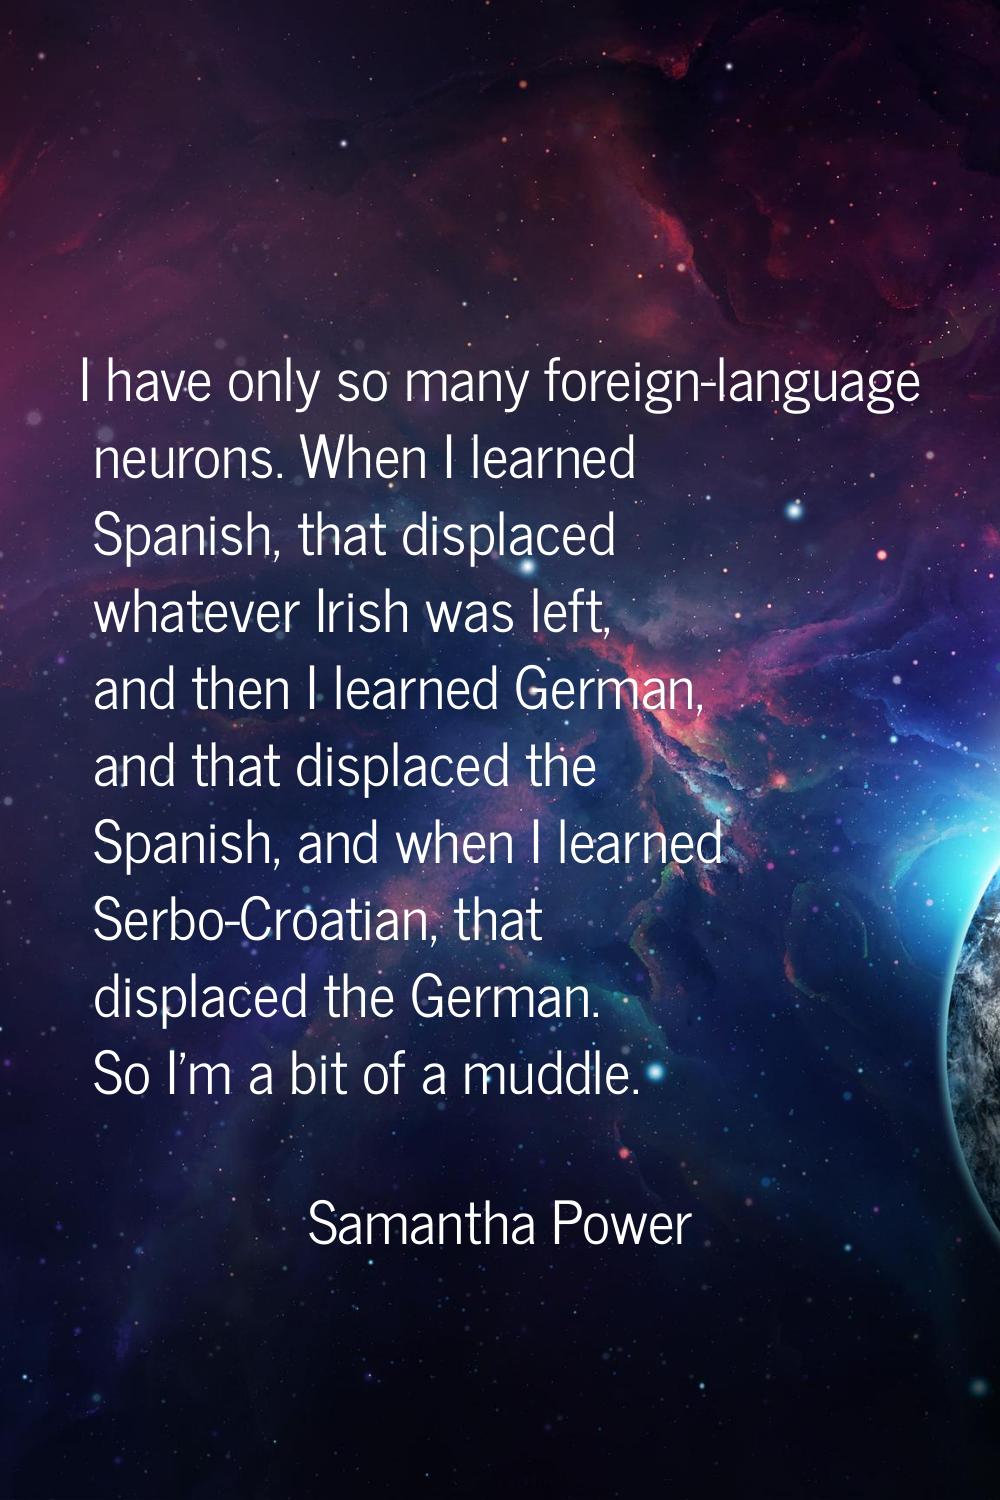 I have only so many foreign-language neurons. When I learned Spanish, that displaced whatever Irish